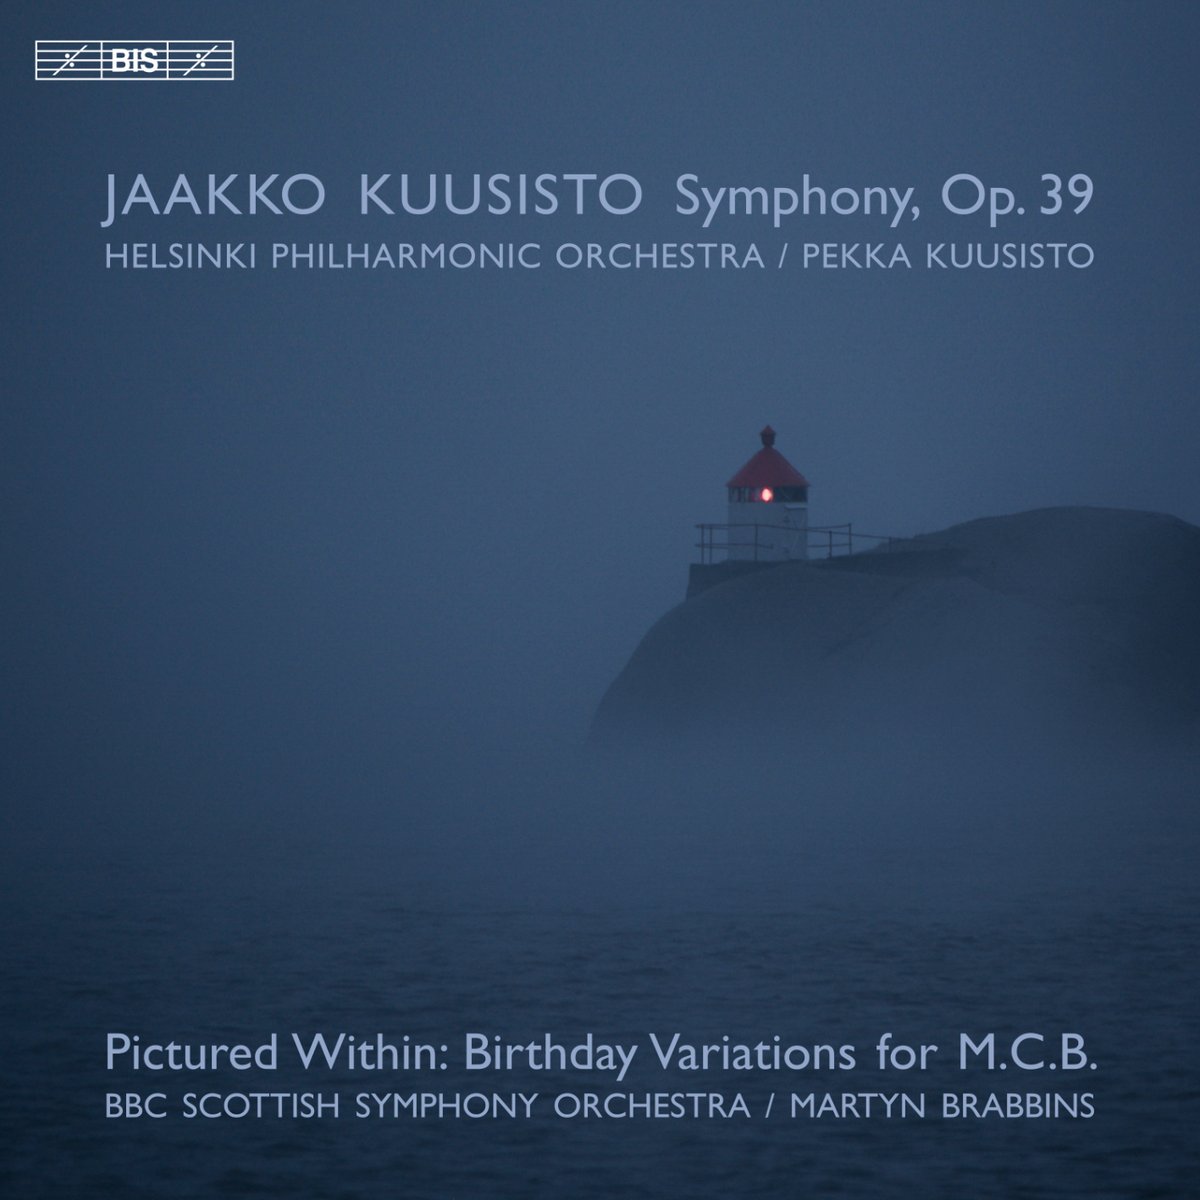 ‘Pictured Within’, released today, pays homage to both Martyn Brabbins & the late Jaakko Kuusisto. Listen to the marvellous performances by @HelsinkiPhil and @BBCSSO here: bisrecords.lnk.to/2747